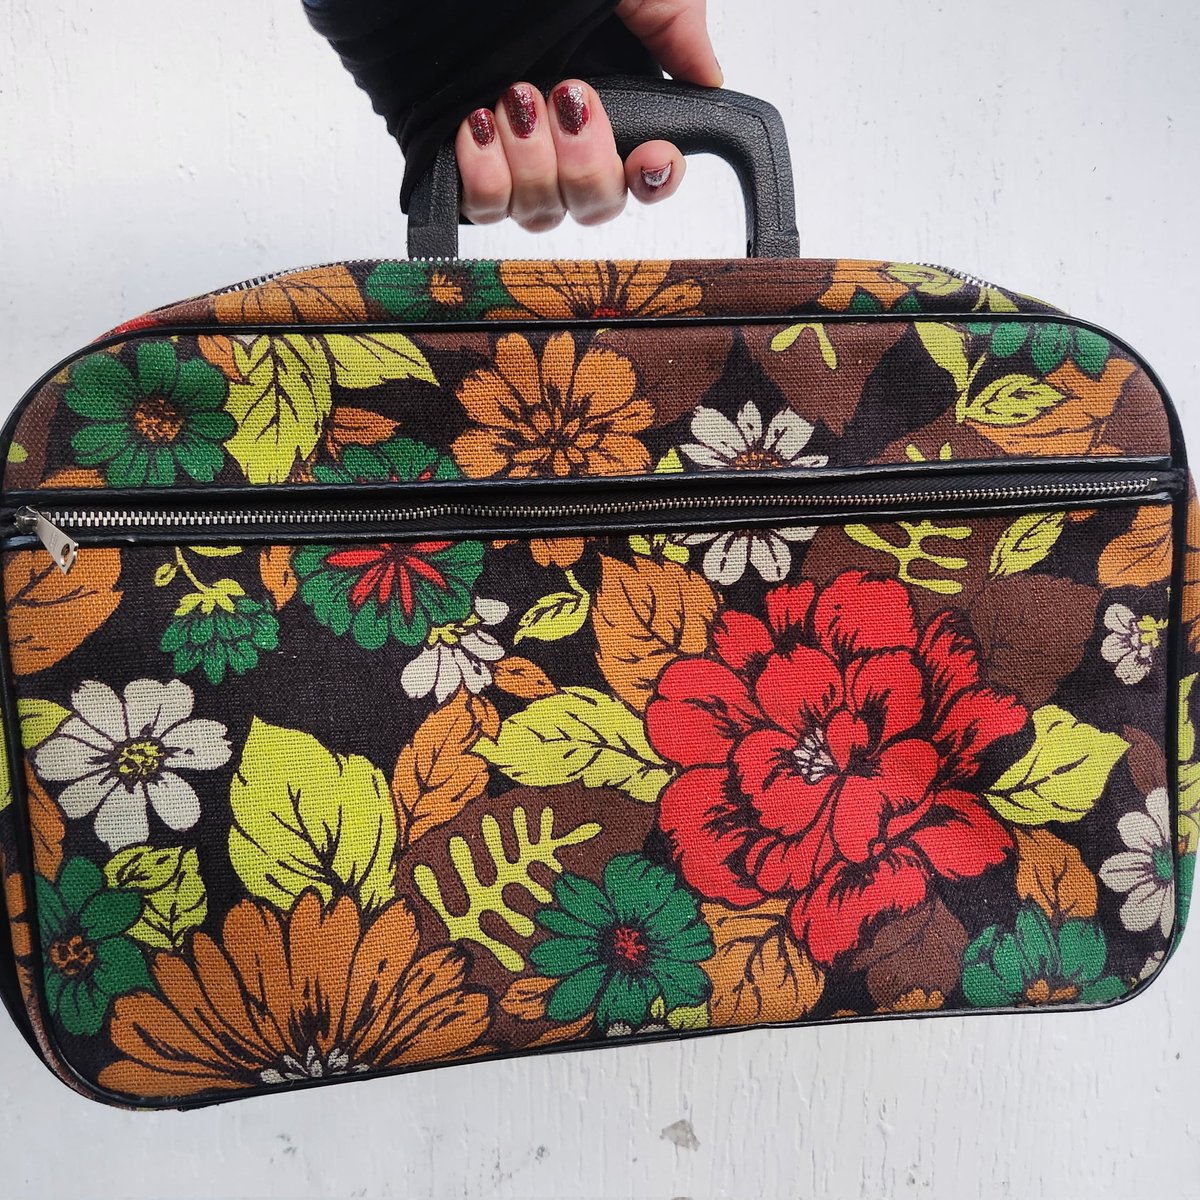 Add some sunshine to your life with this retro flower power canvas carryon suitcase - it takes you on a trip back in time! #70sstyle #etsyvintage #vintage #timetravel #60sstyle #flowers #getaway #treatyourself #boutique #vintageshop